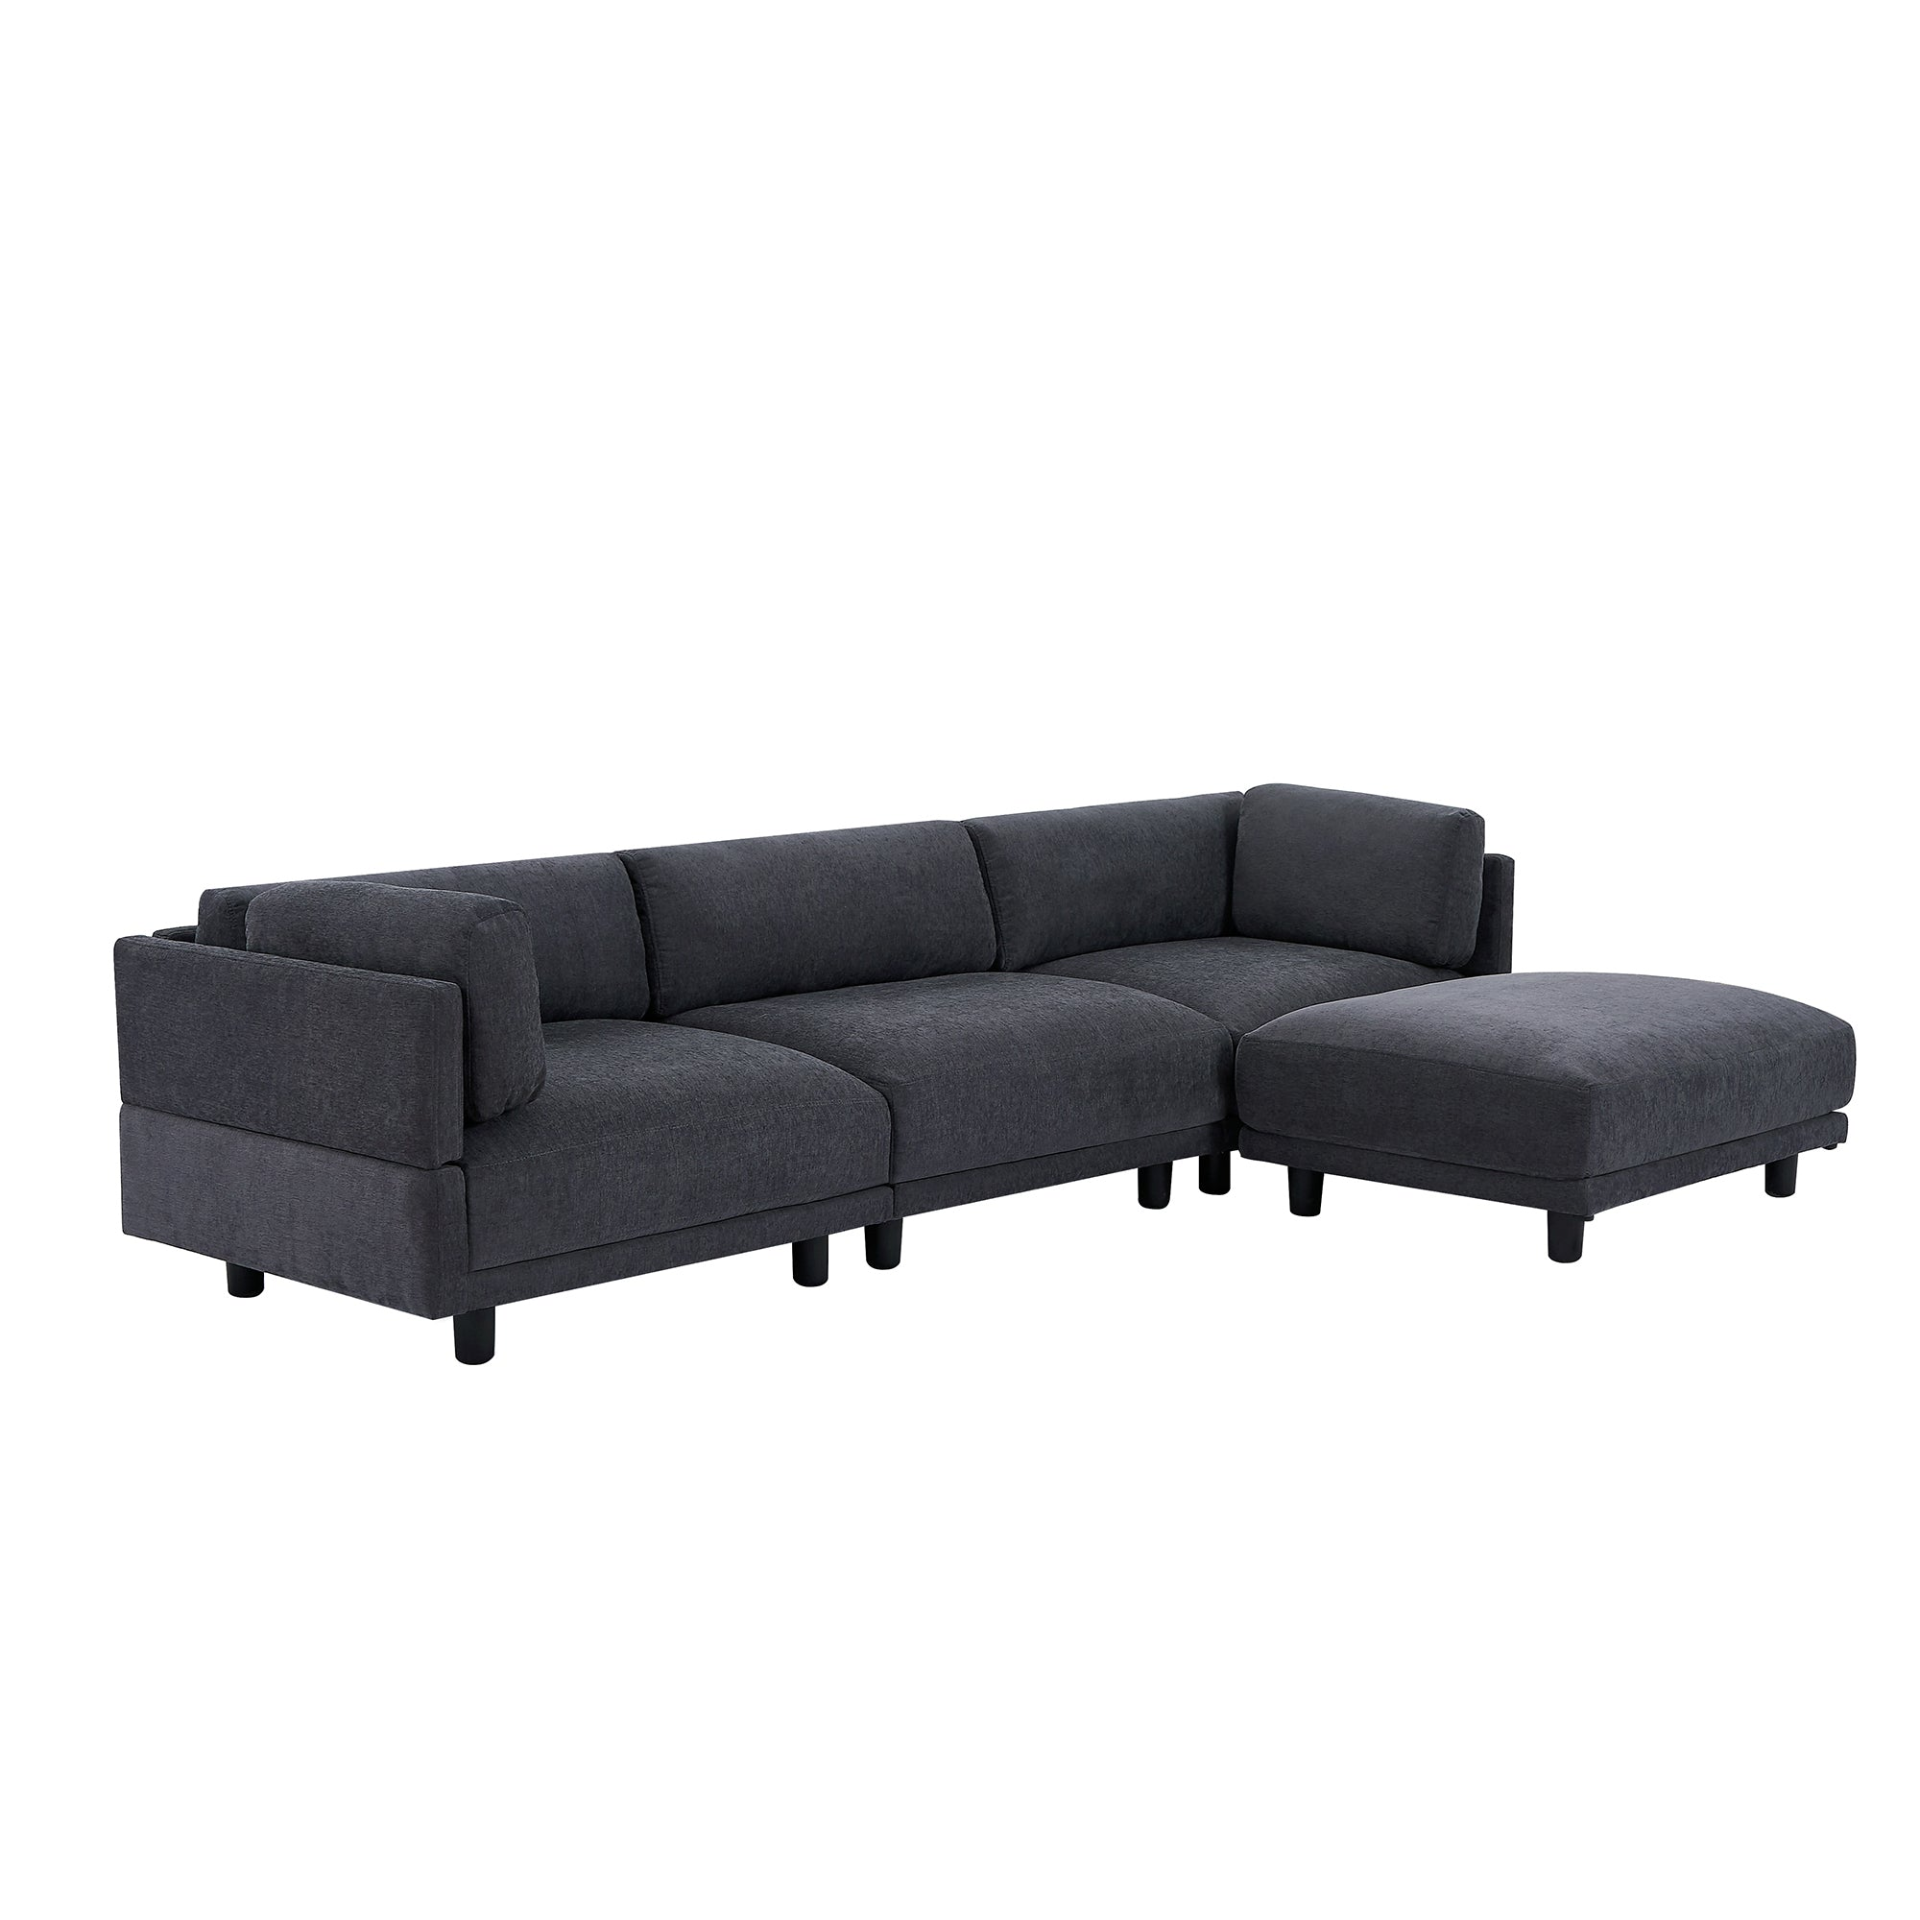 Upholstery Convertible Sectional Sofa, L Shaped Couch with Reversible Chaise, Goodies N Stuff